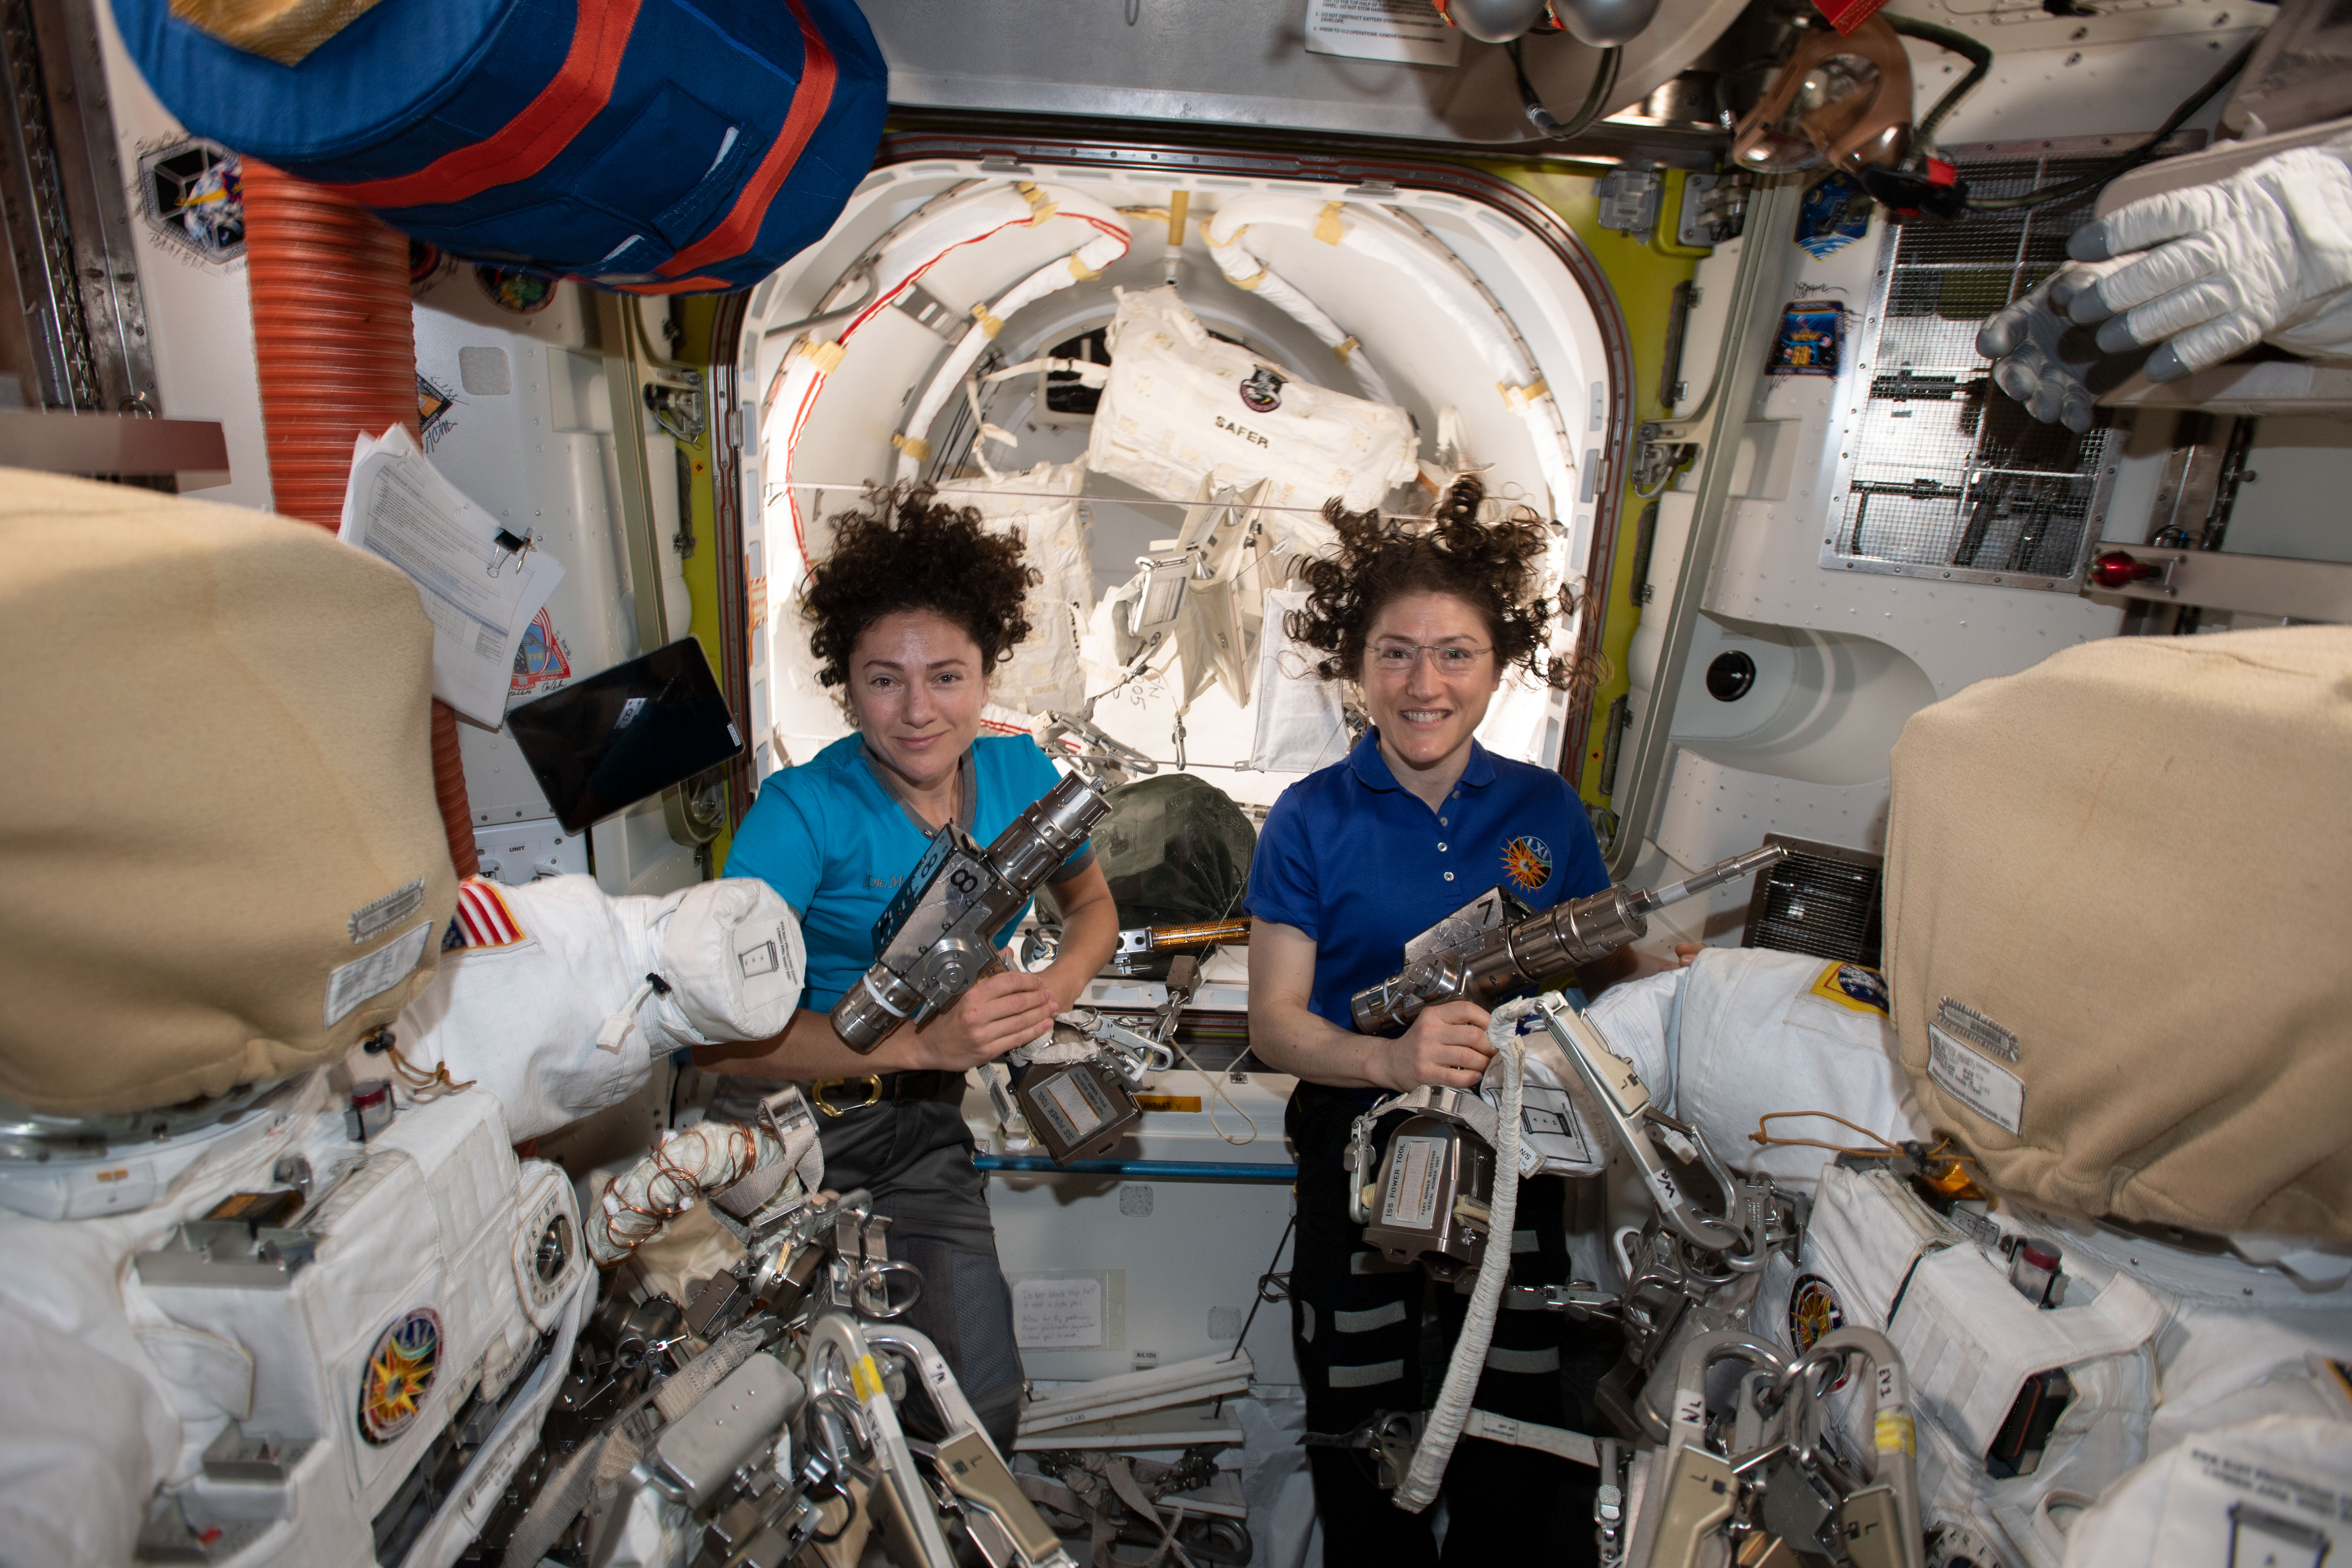 Jessica Meir and Christina Koch side by side in zero gravity on the ISS.